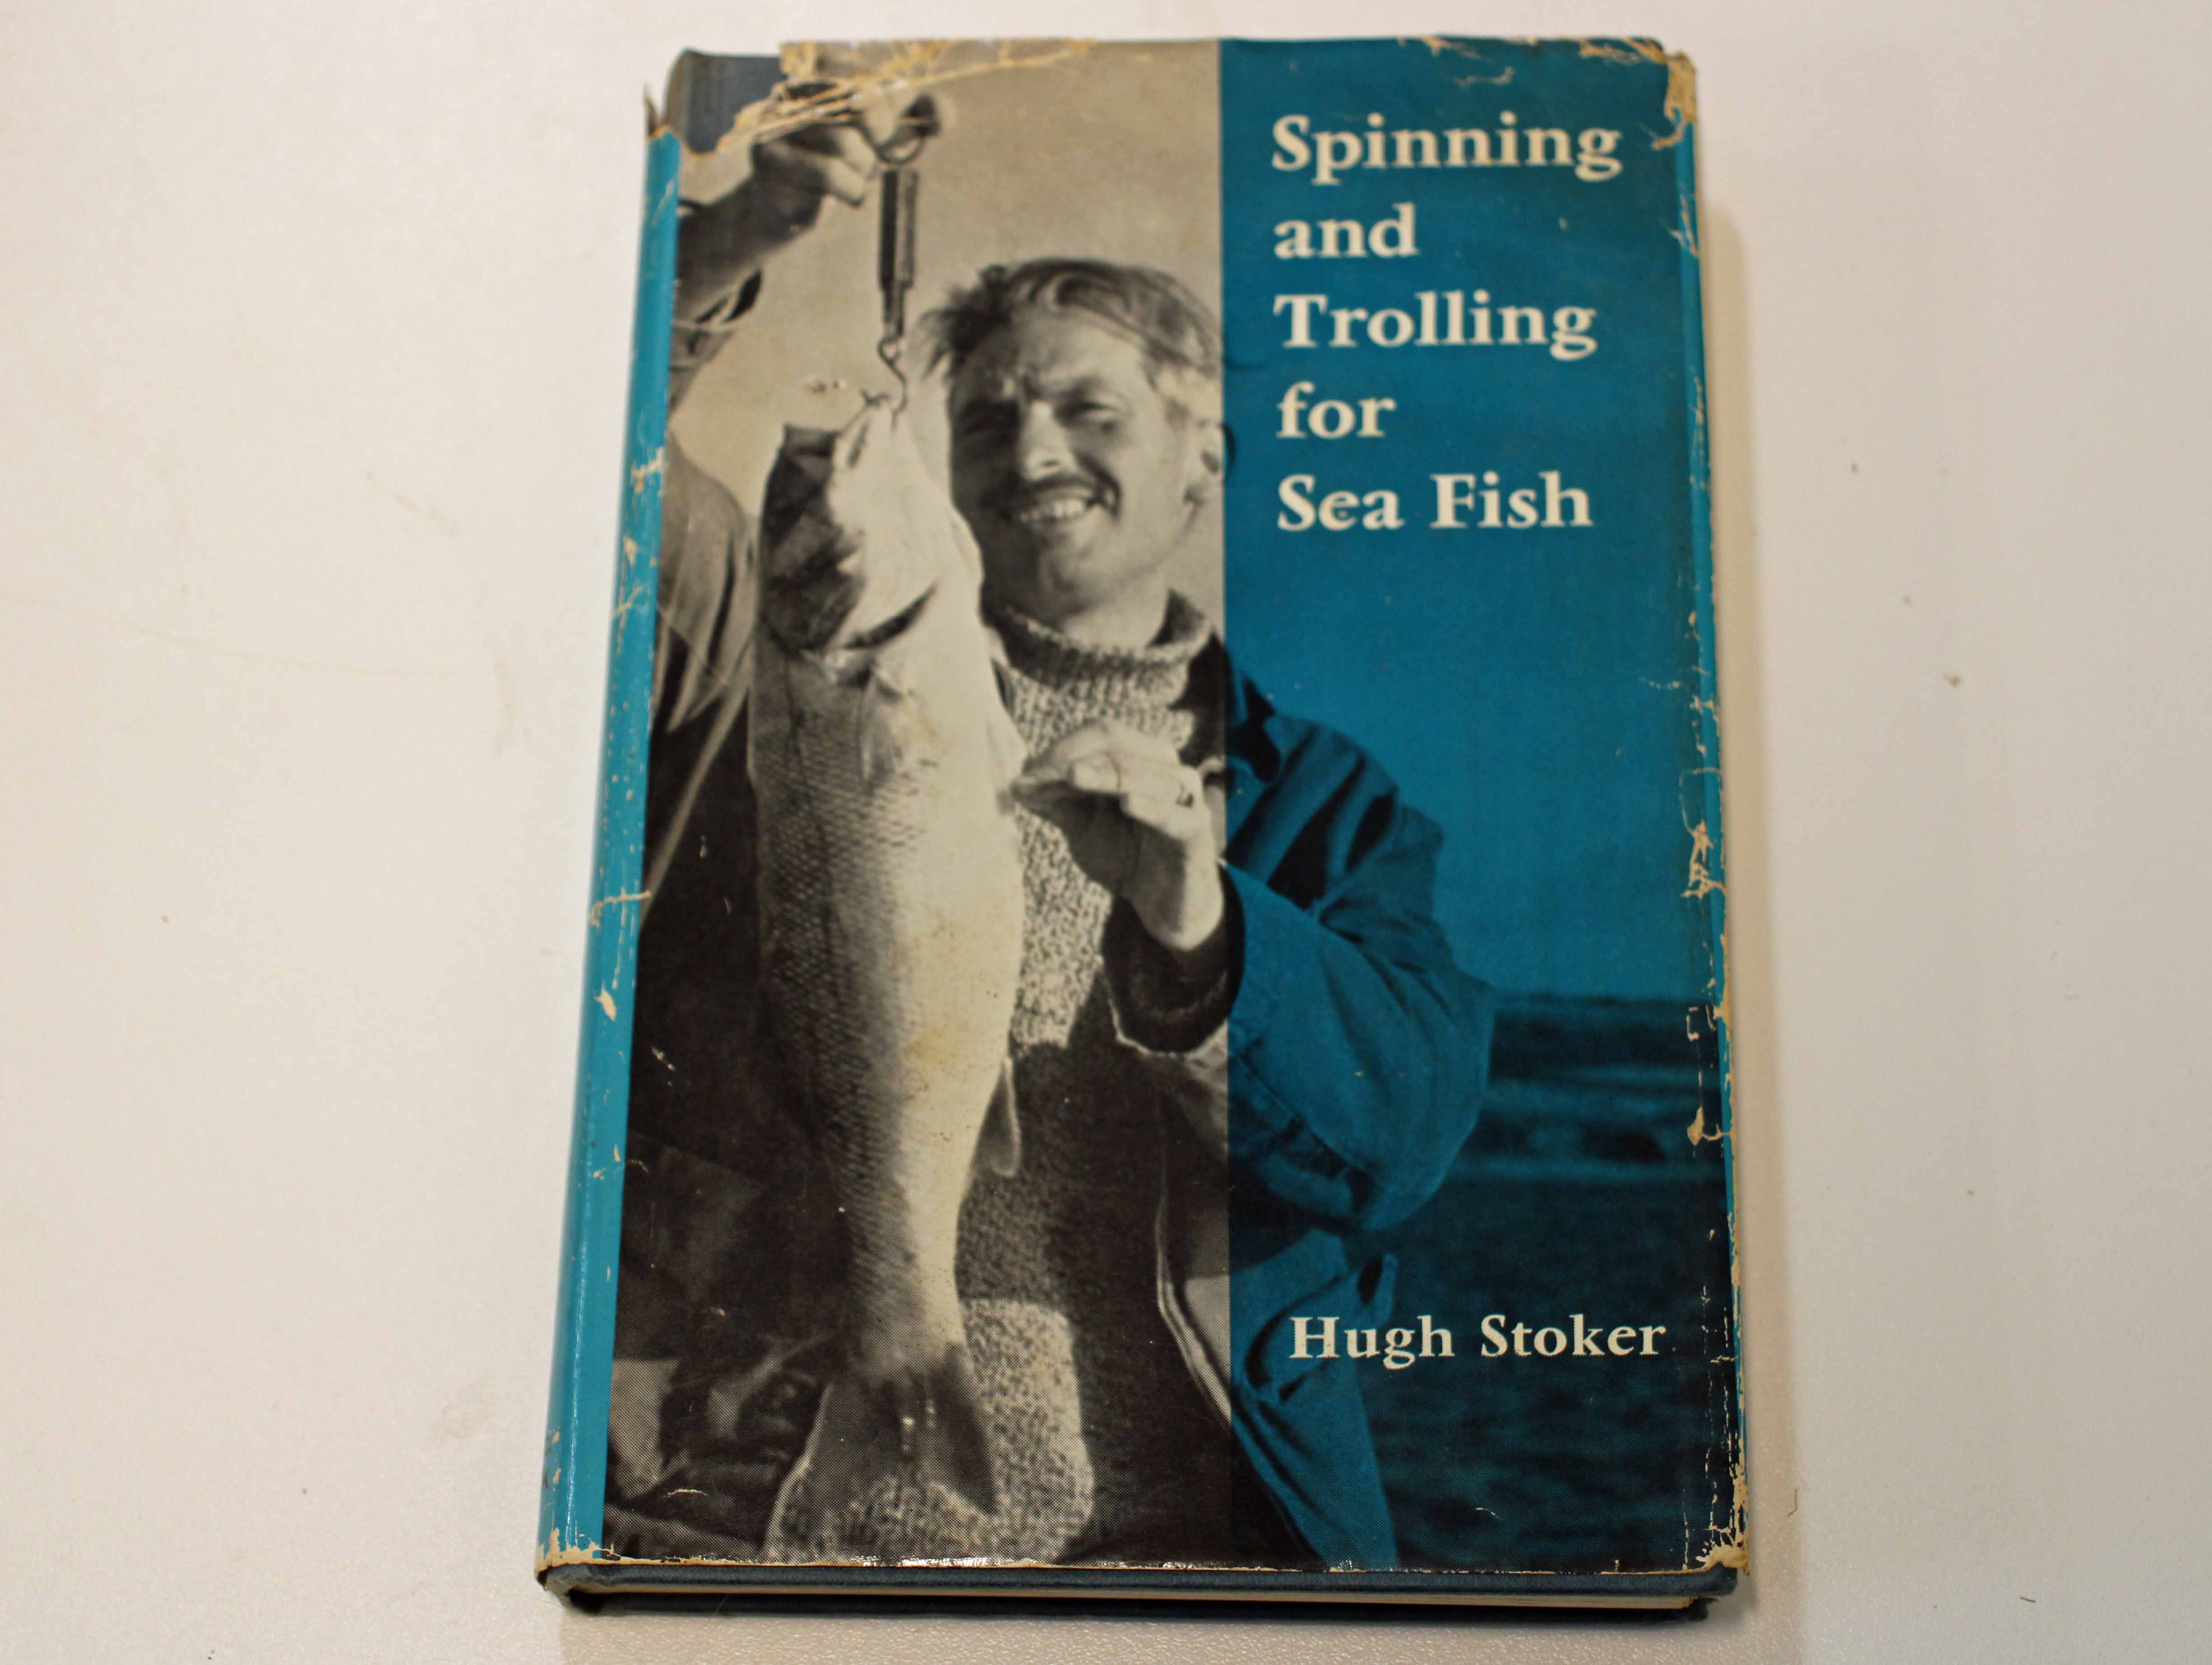 Spinning and Trolling for Sea Fish